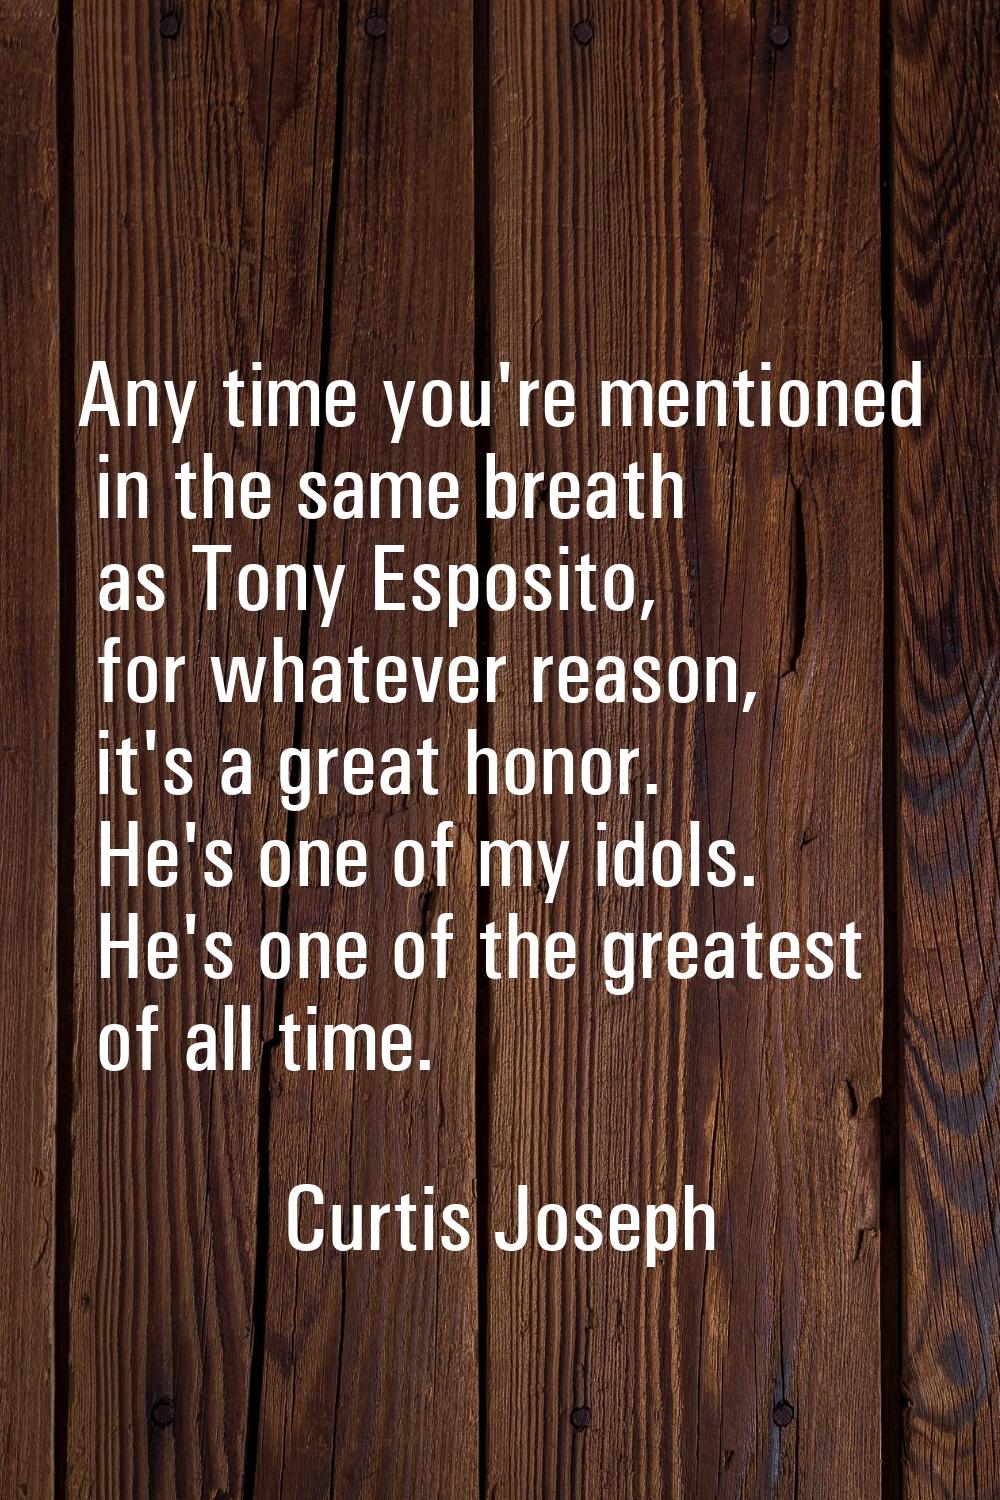 Any time you're mentioned in the same breath as Tony Esposito, for whatever reason, it's a great ho